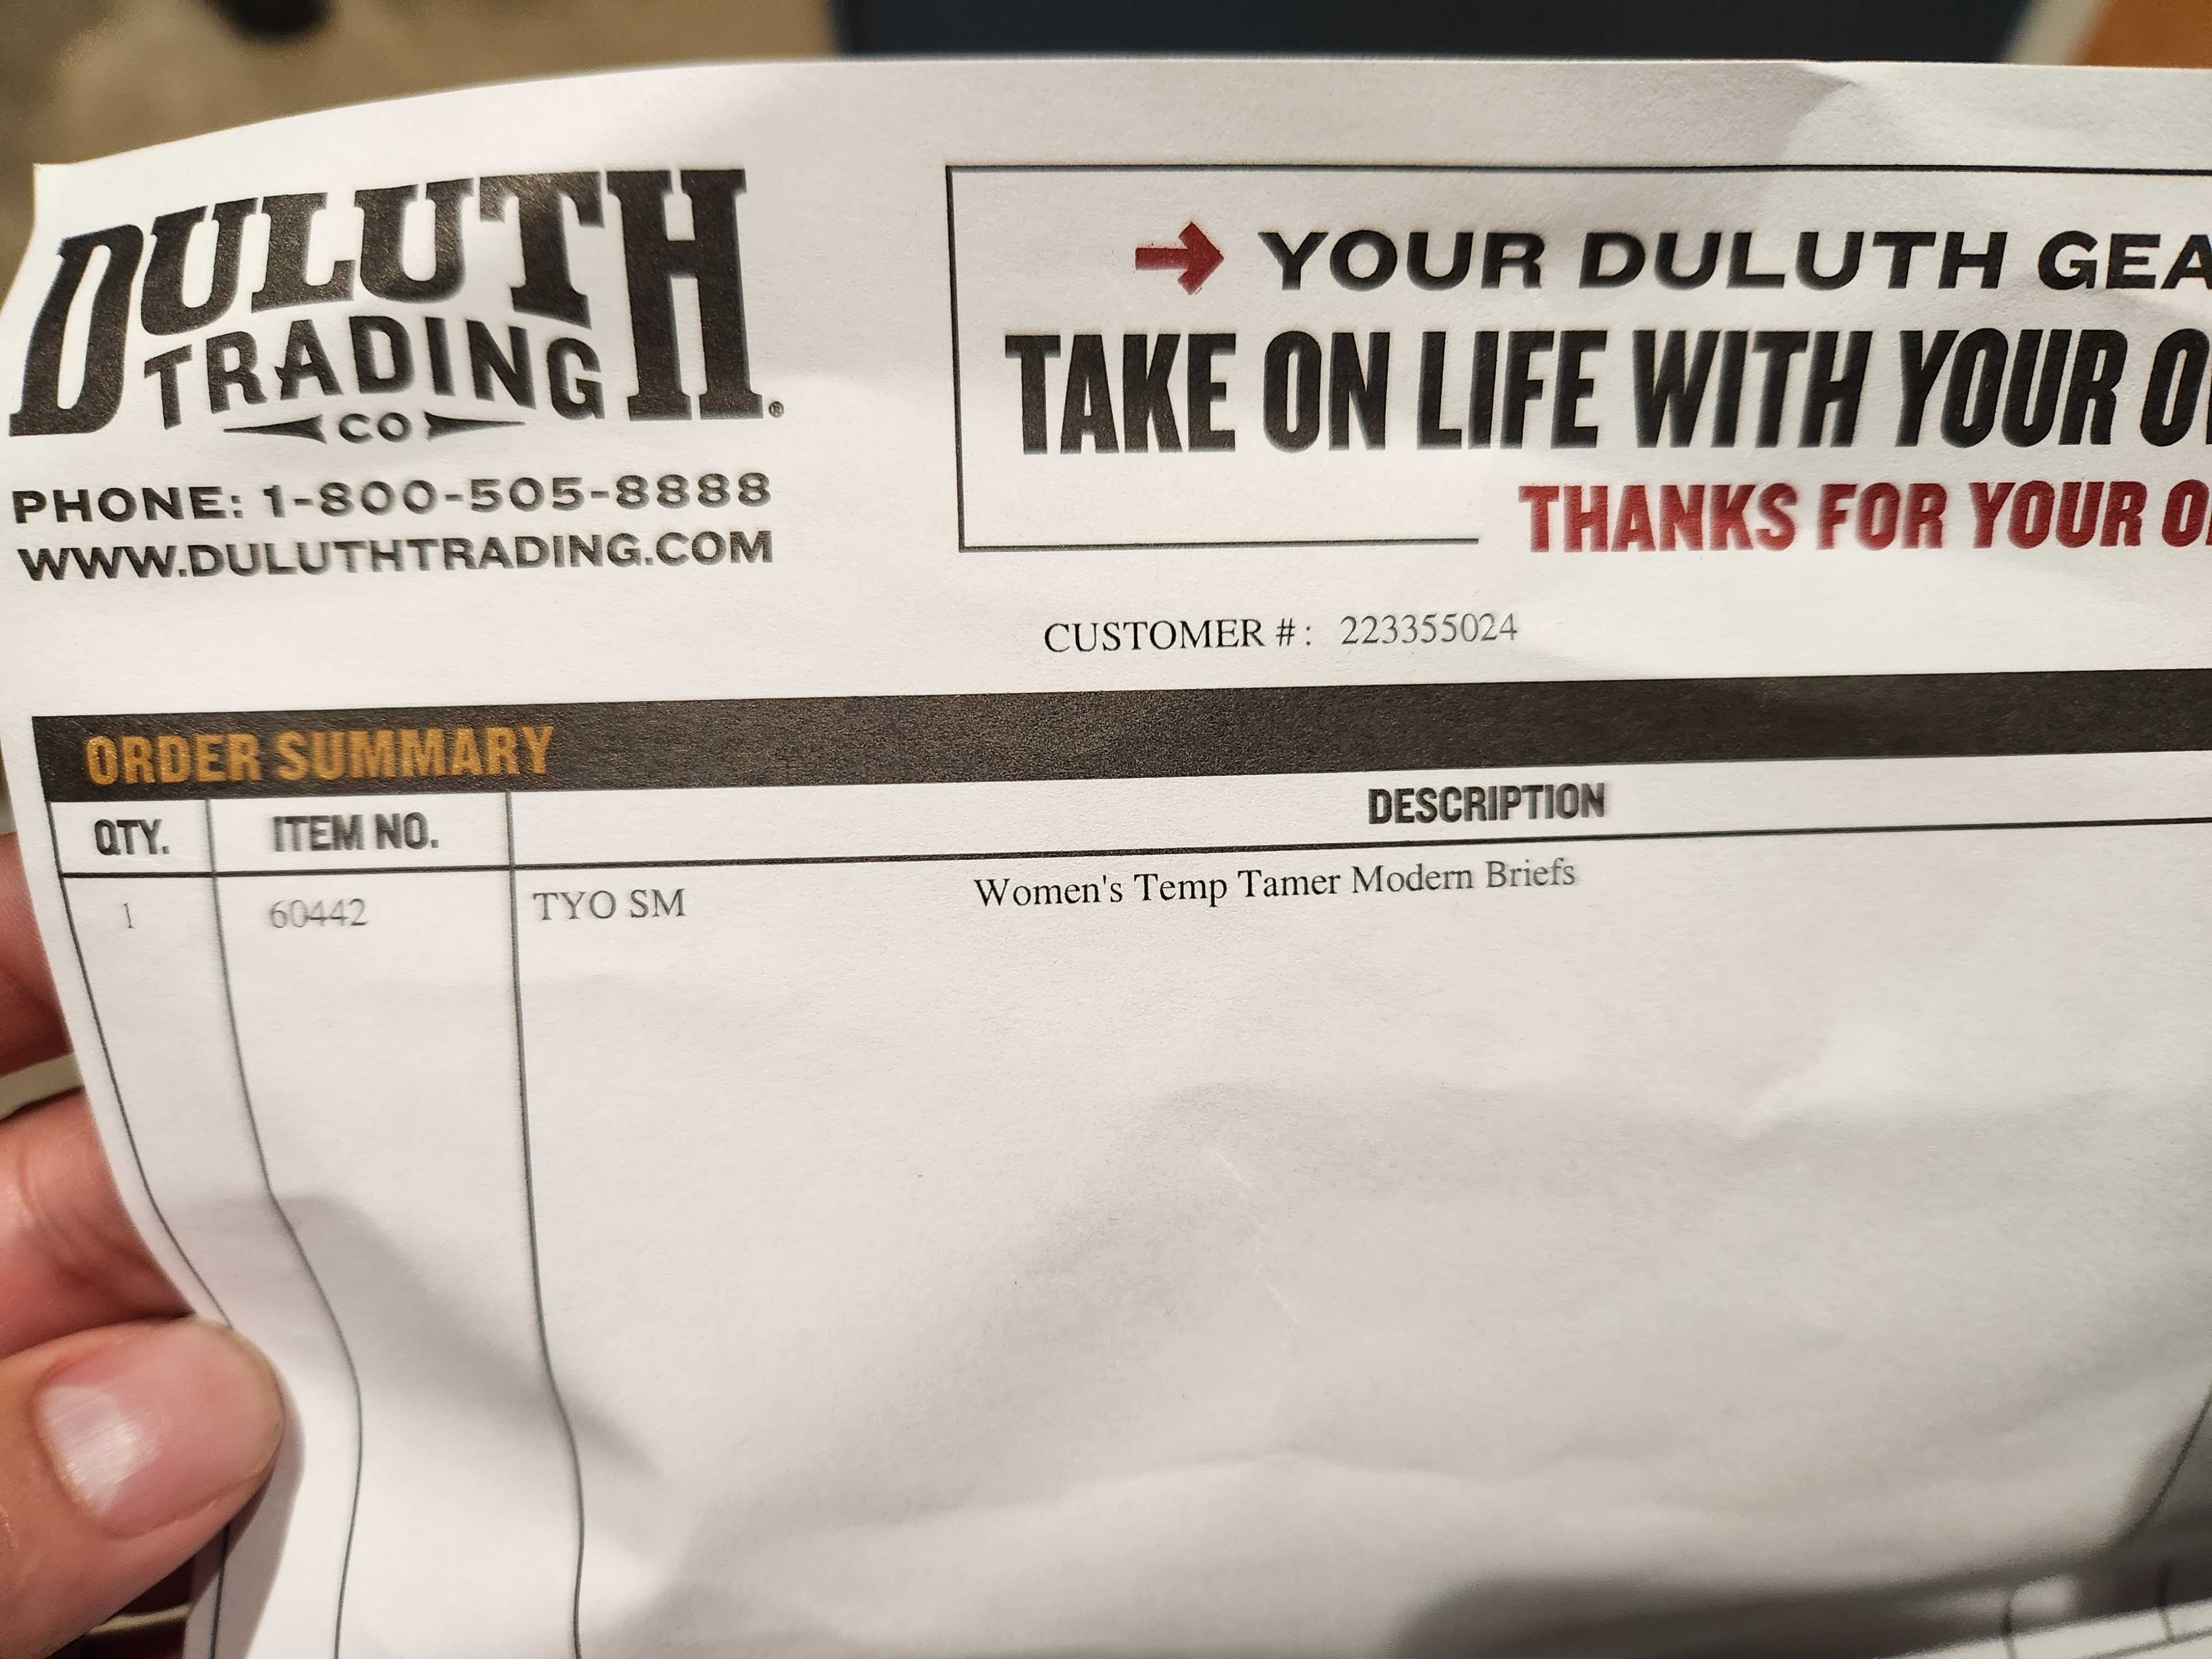 Duluth Trading Company - Trading Tales: Stories from our customers that are  too inspiring, too funny or just plain too odd to pass up sharing with you.  Longtime customer Joseph C. checked